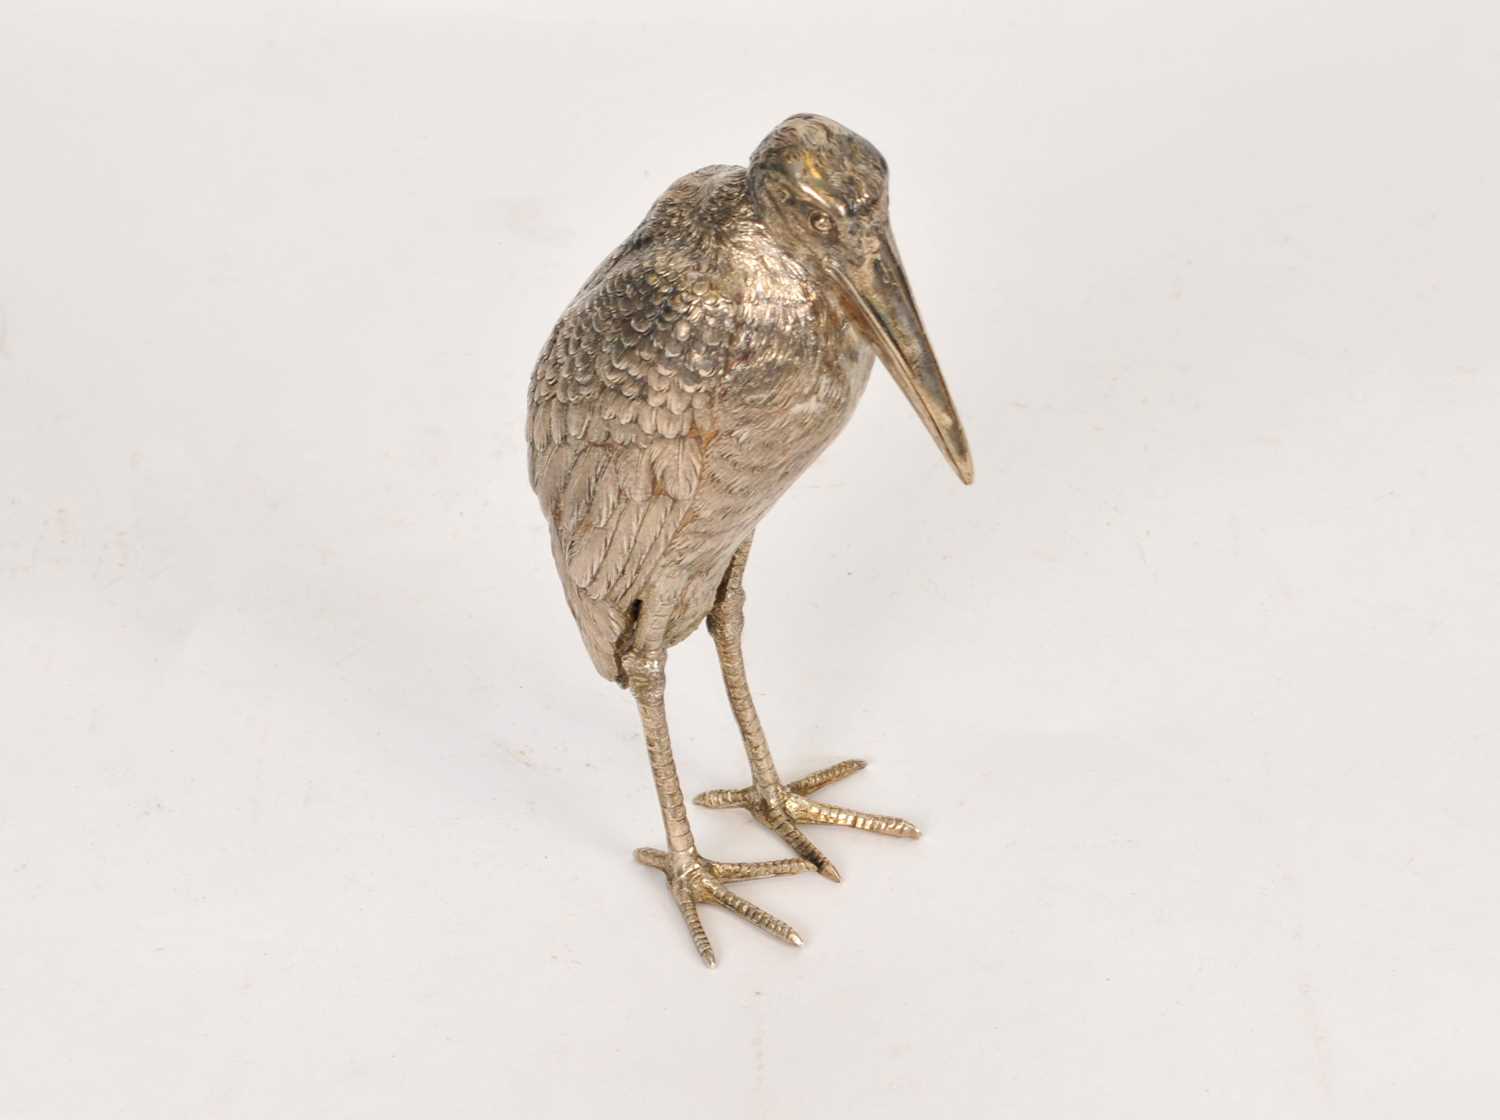 Lot 24 - A silver model of a standing crane or heron